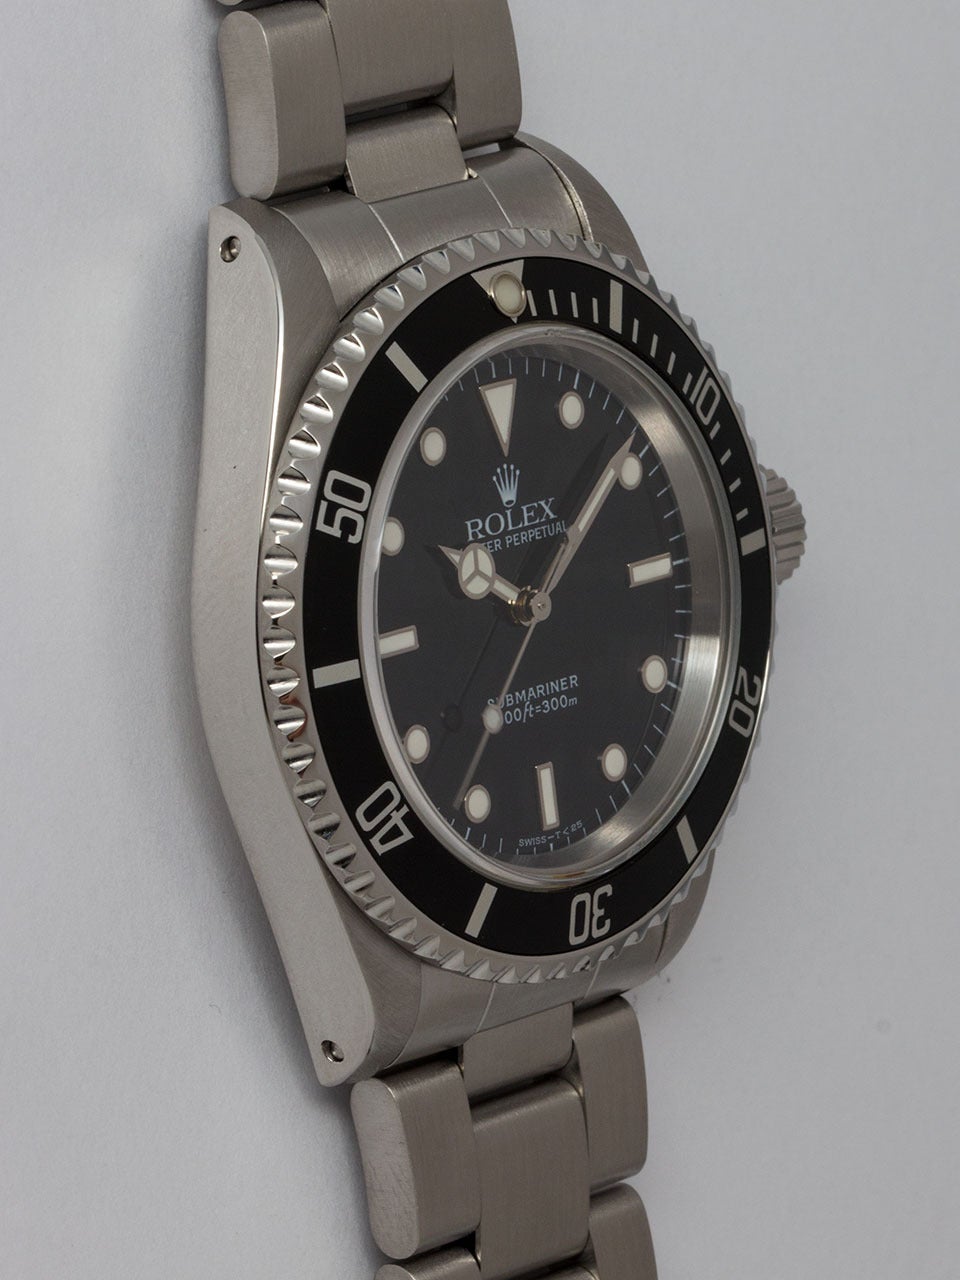 Rolex Stainless Steel Submariner Wristwatch ref 14060 serial #A5 circa 1998. 40mm diameter case with unidirectional elapsed time bezel and sapphire crystal. Glossy black original Swiss T<25 dial with white gold luminous surrounds and matching